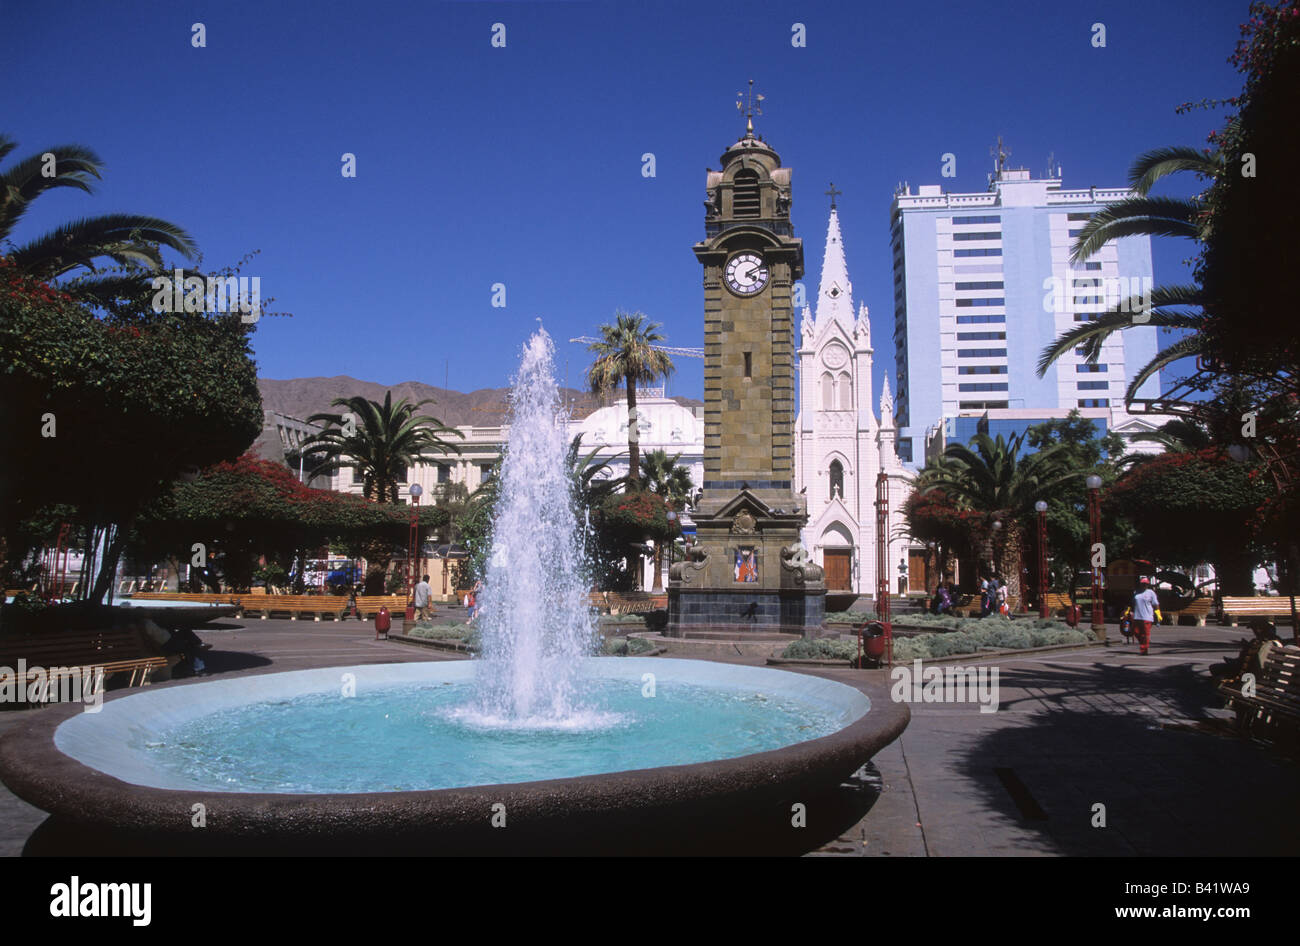 Fountain and clock tower in Plaza Colon, St. Joseph's / San José cathedral behind, Antofagasta, Chile Stock Photo